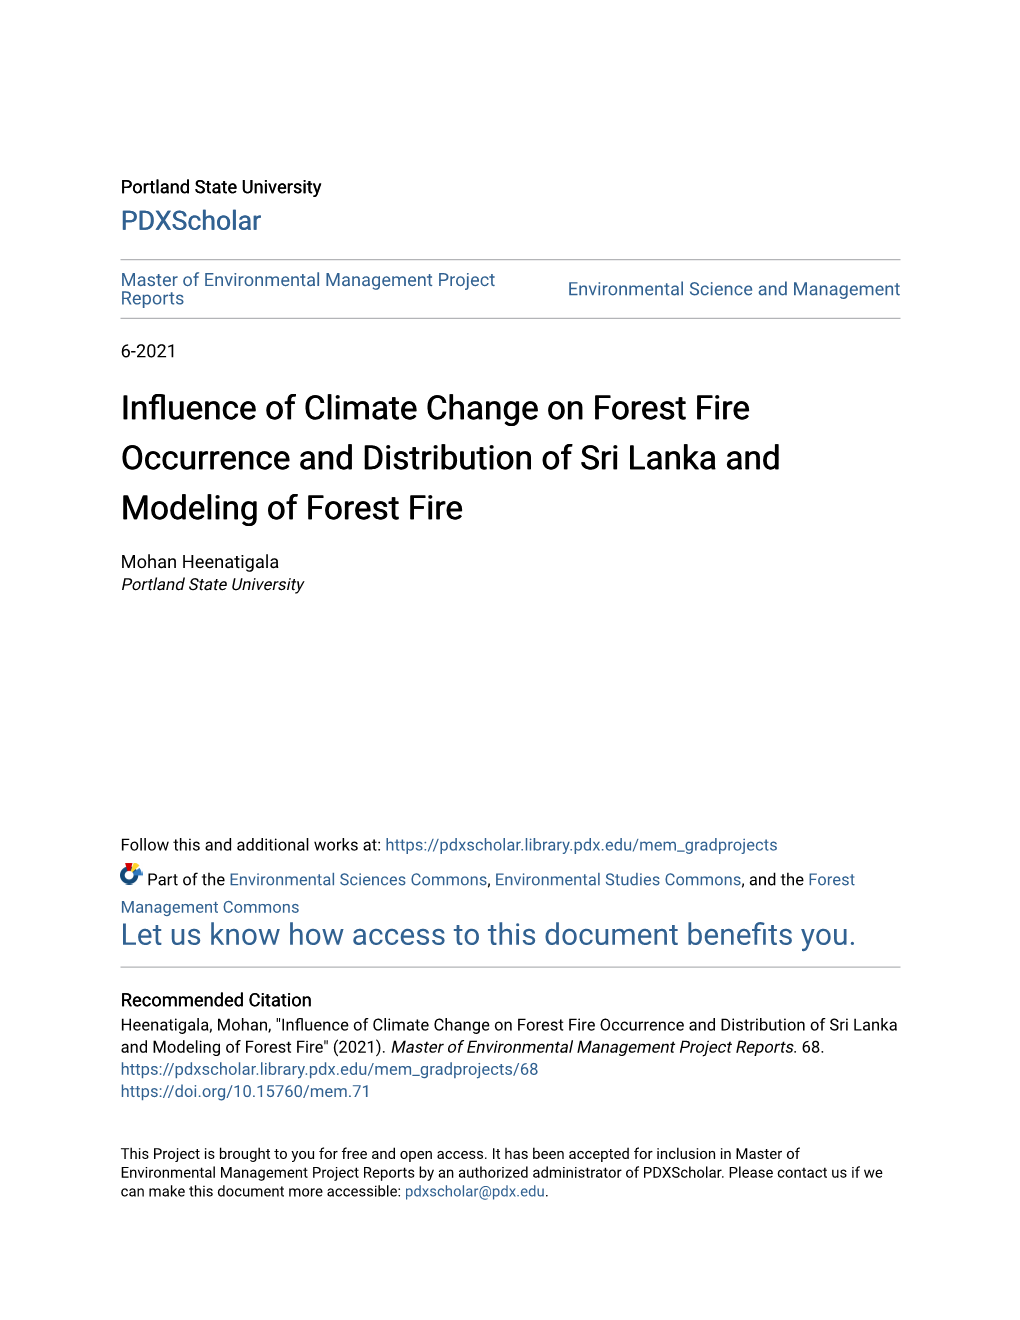 Influence of Climate Change on Forest Fire Occurrence and Distribution of Sri Lanka and Modeling of Forest Fire